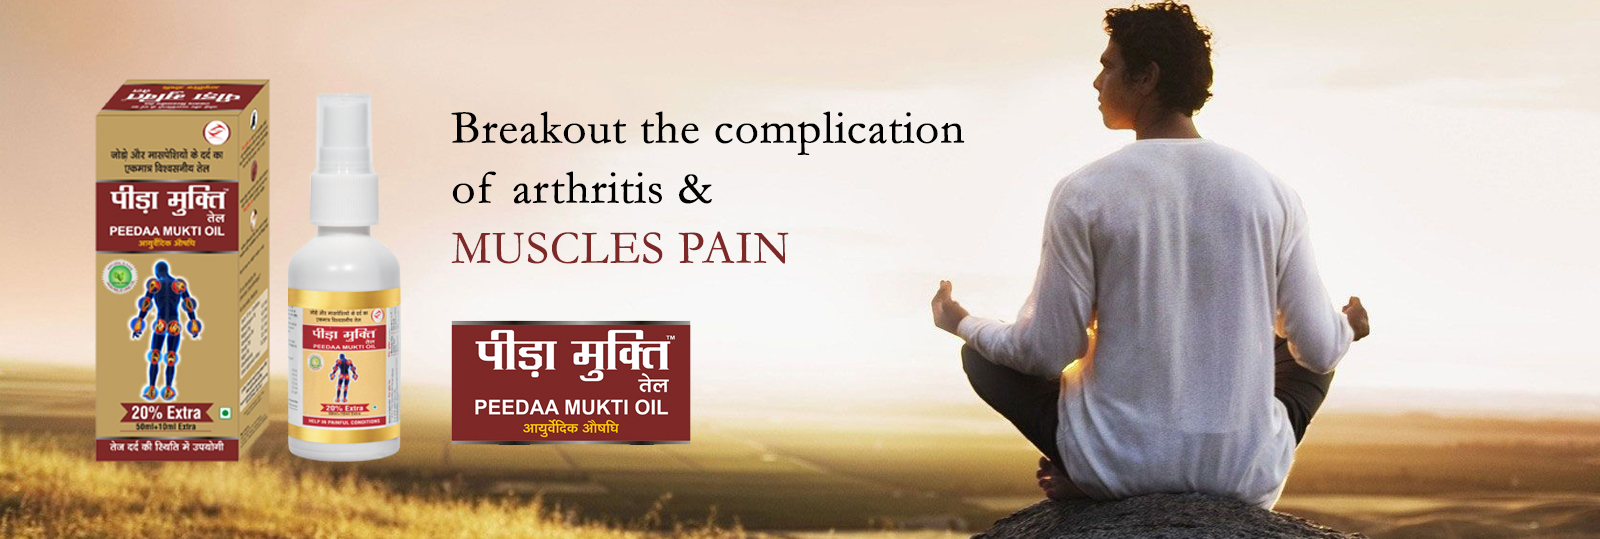 breackout the complication of arthritis and muscles pain